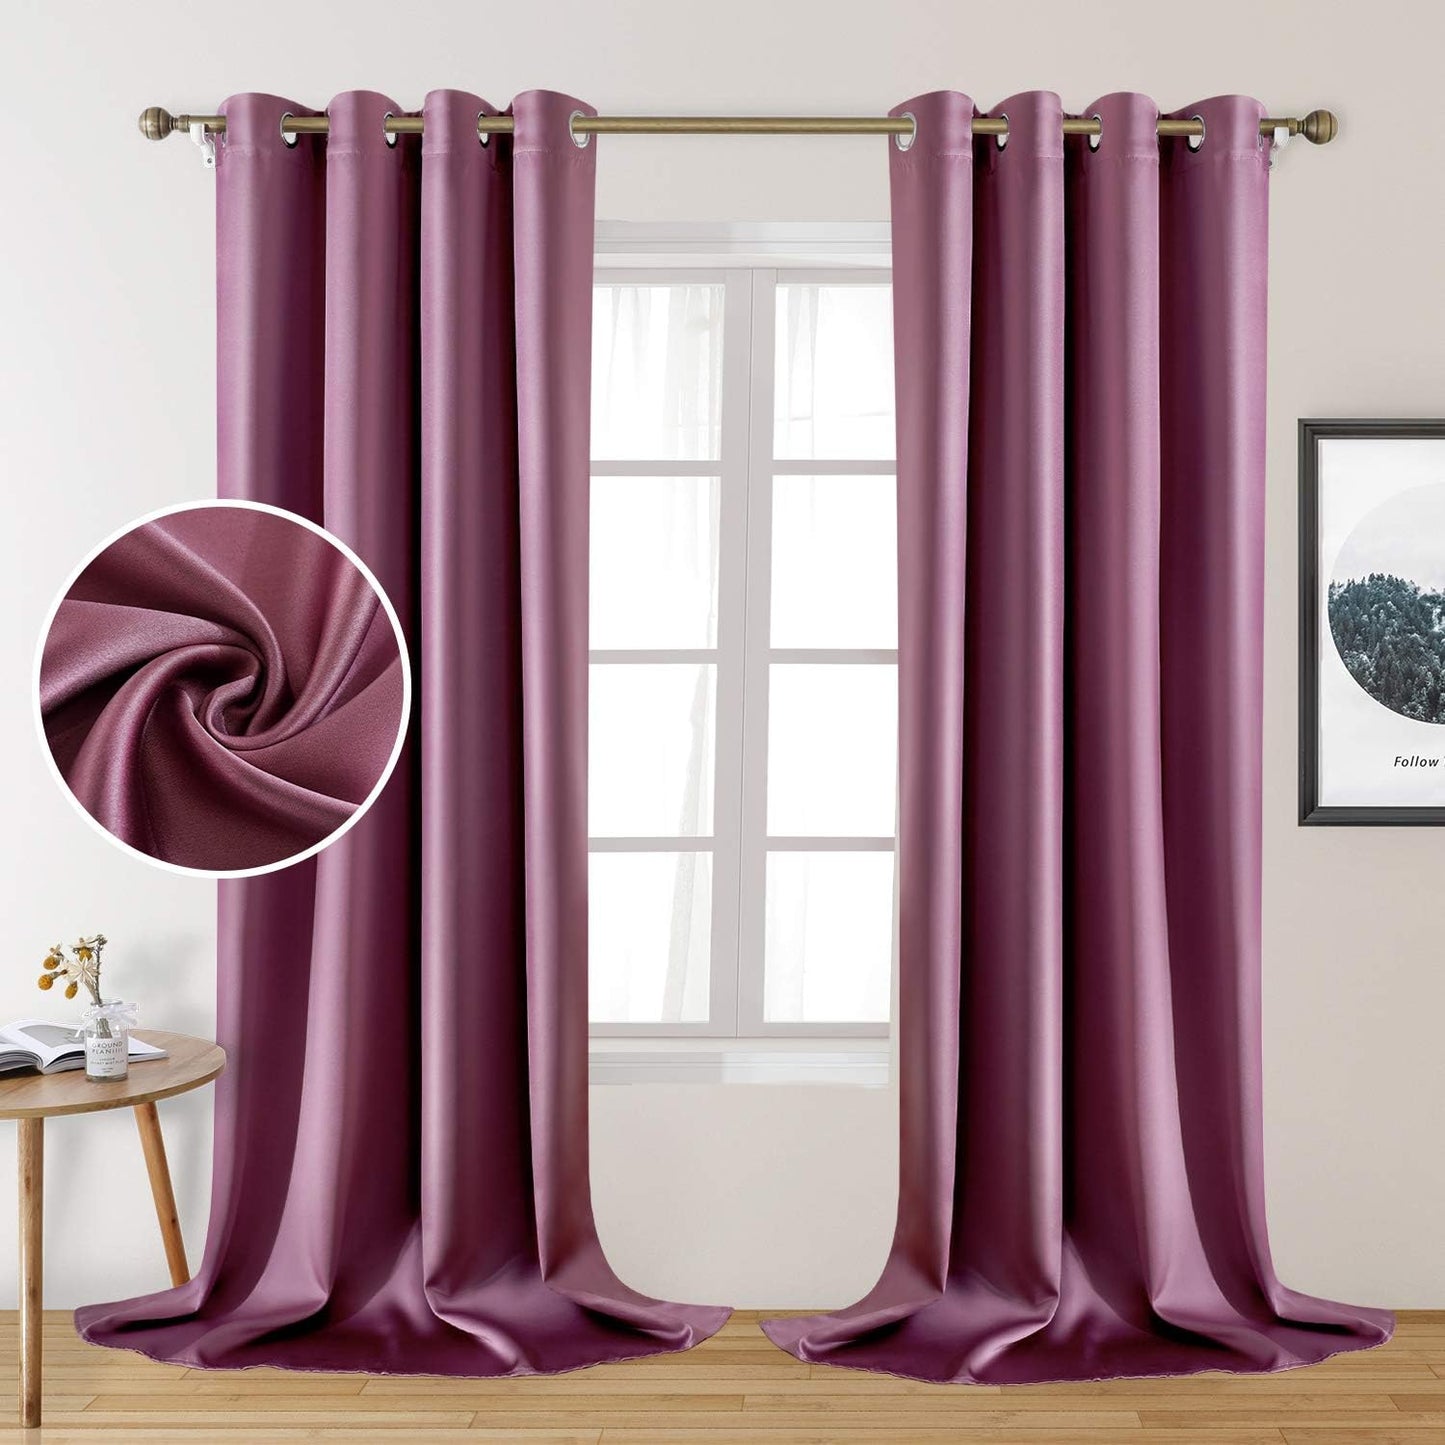 HOMEIDEAS Gold Blackout Curtains, Faux Silk for Bedroom 52 X 84 Inch Room Darkening Satin Thermal Insulated Drapes for Window, Indoor, Living Room, 2 Panels  HOMEIDEAS Lavender 52" X 108" 